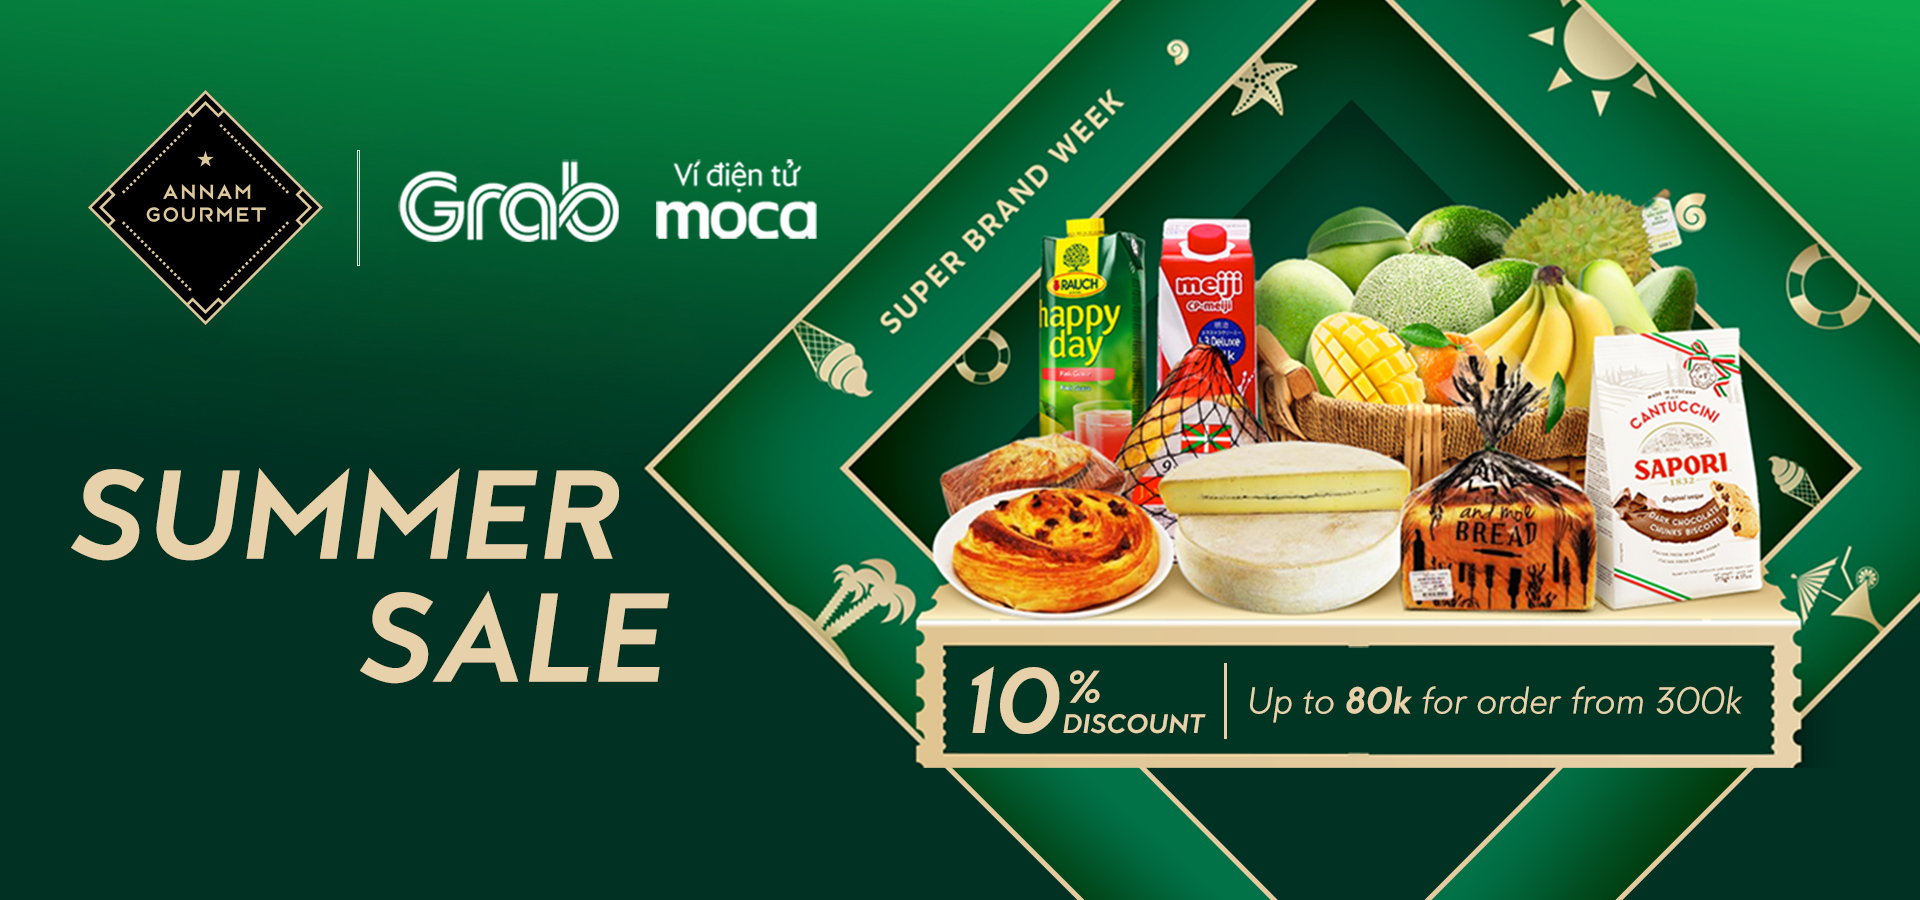 Annam Gourmet Promotion with Grab